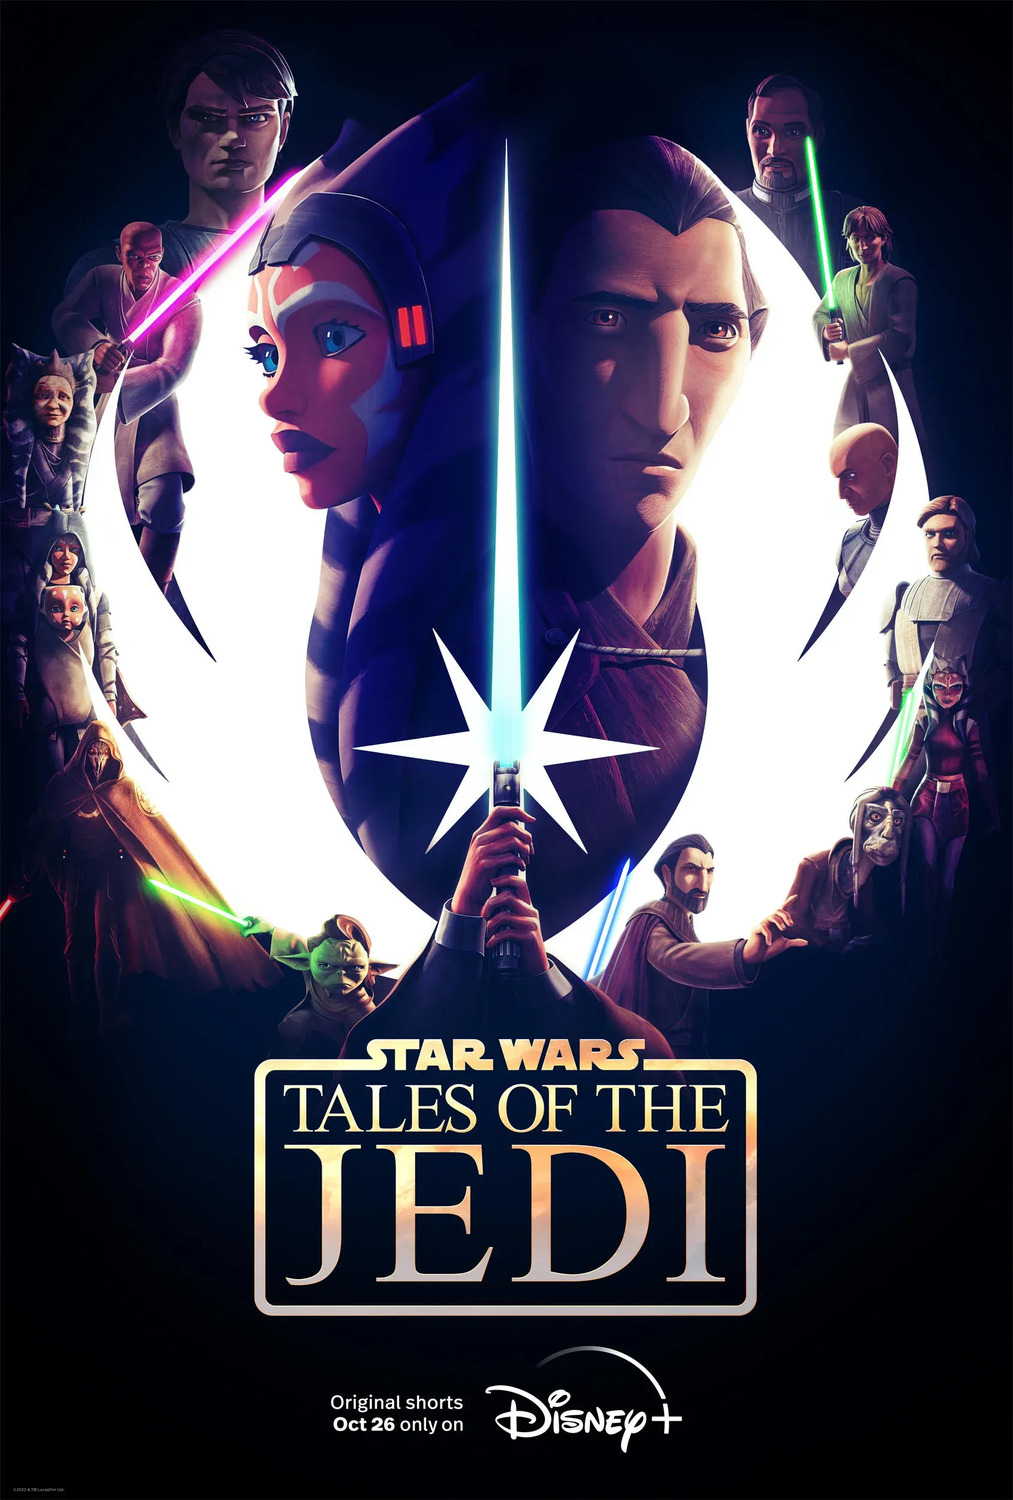 Star Wars: Tales of the Jedi - Série TV 2022 streaming VF gratuit complet